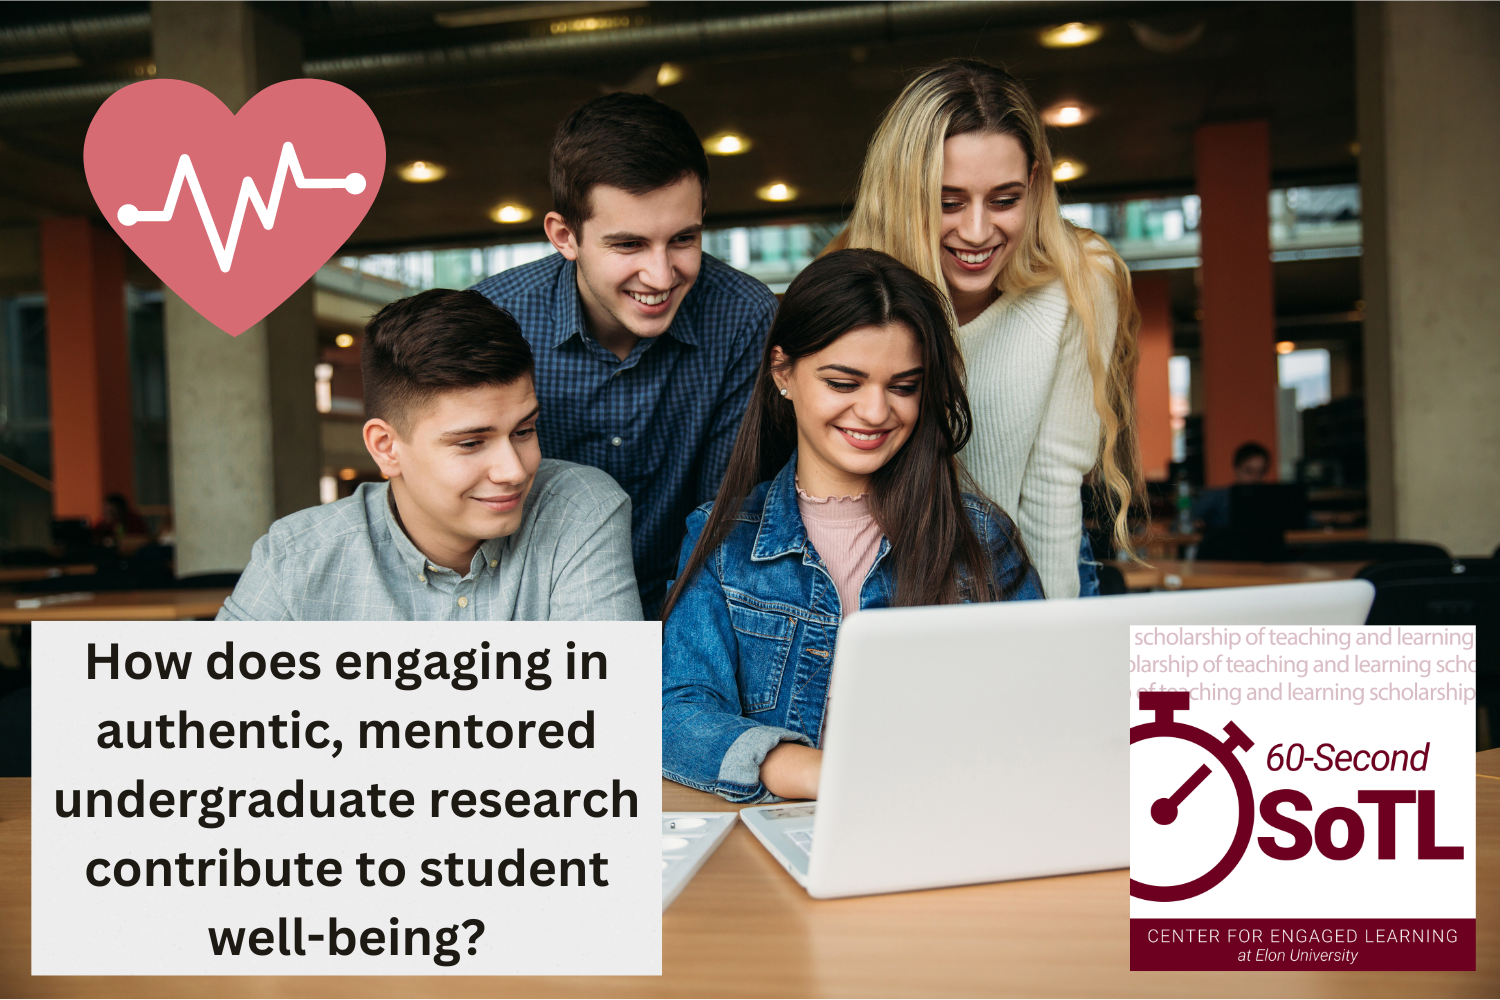 A women works at a computer while three other people look over her shoulder. In the top left corner is a heart icon with an EKG symbol. In the bottom left corner are the words, "How does engaging in authentic, mentored undergraduate research contribute to student well-being?"